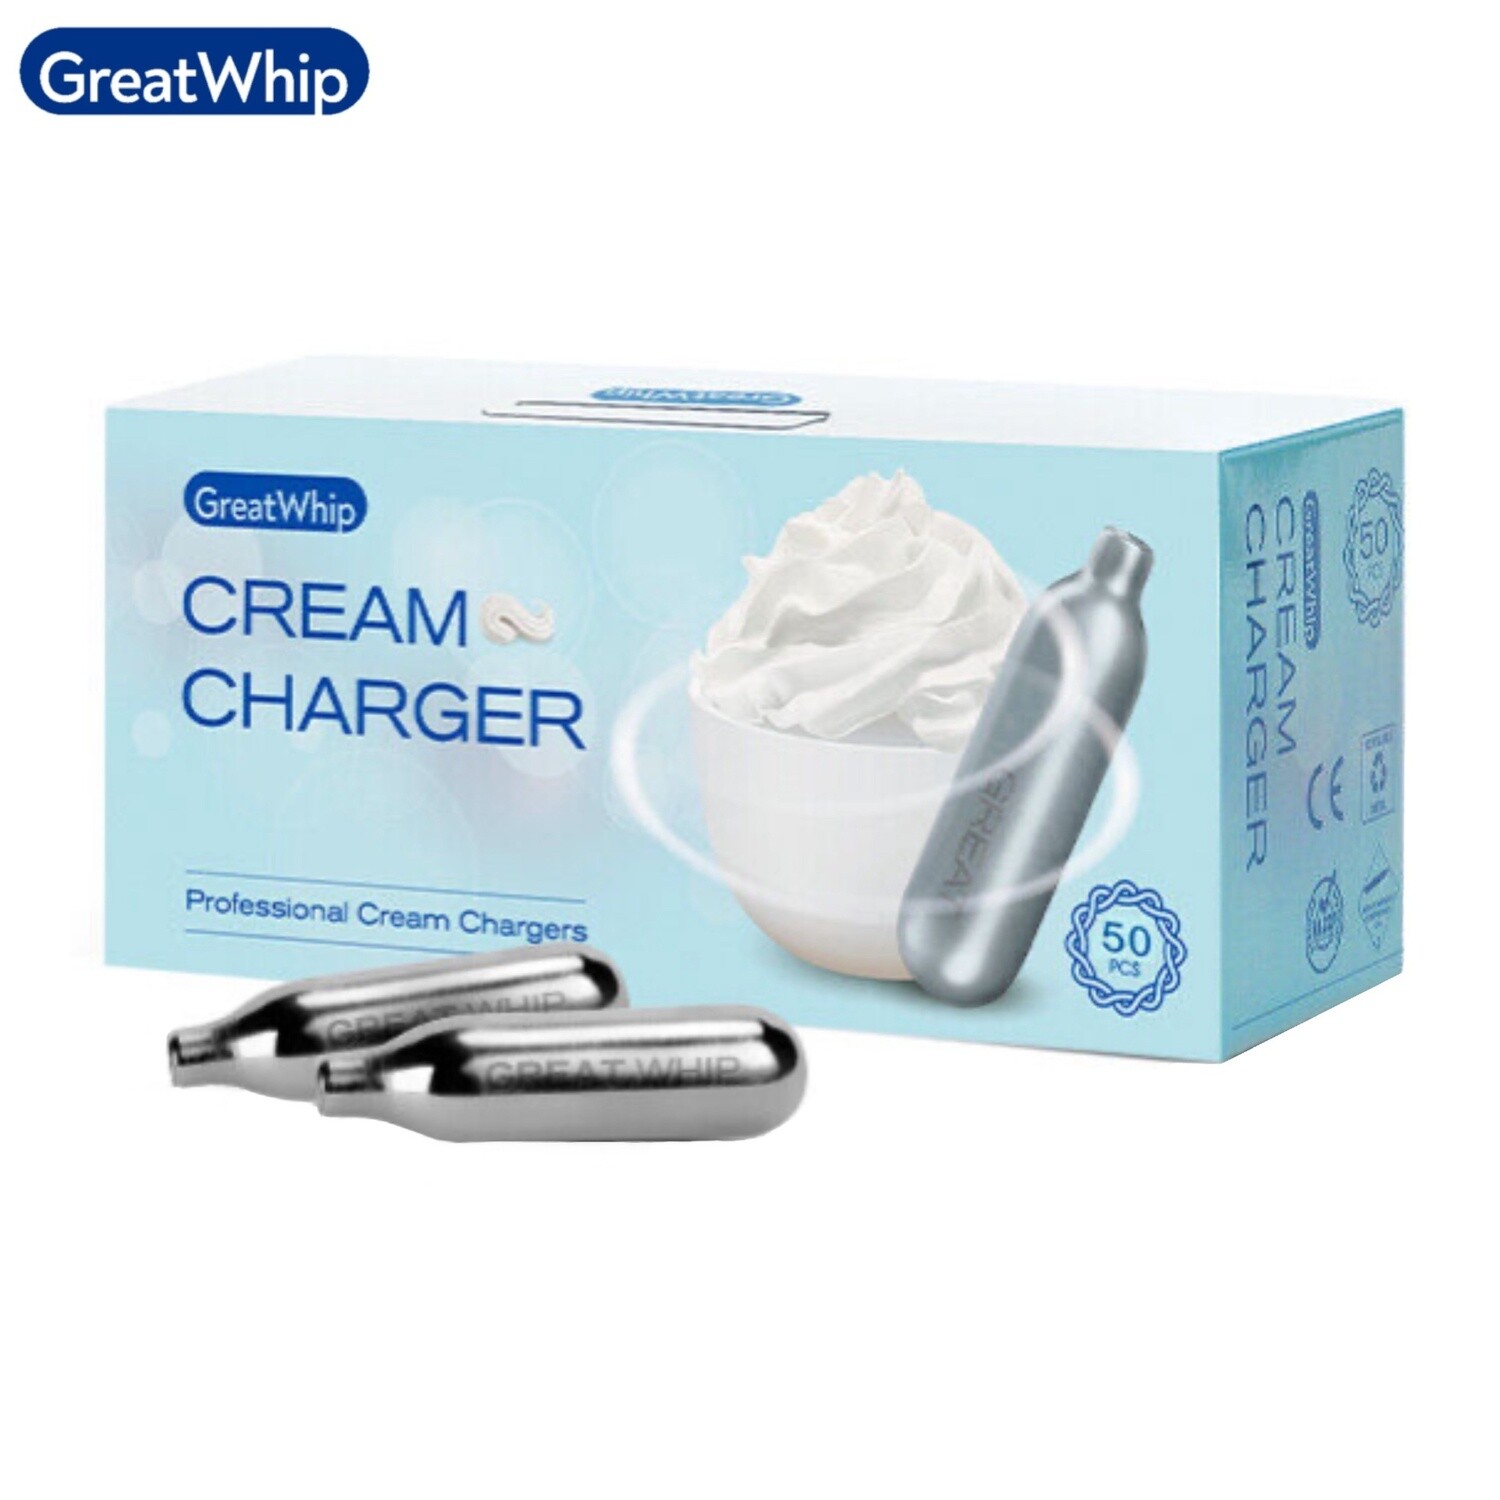 Great Whip™ Cream Chargers